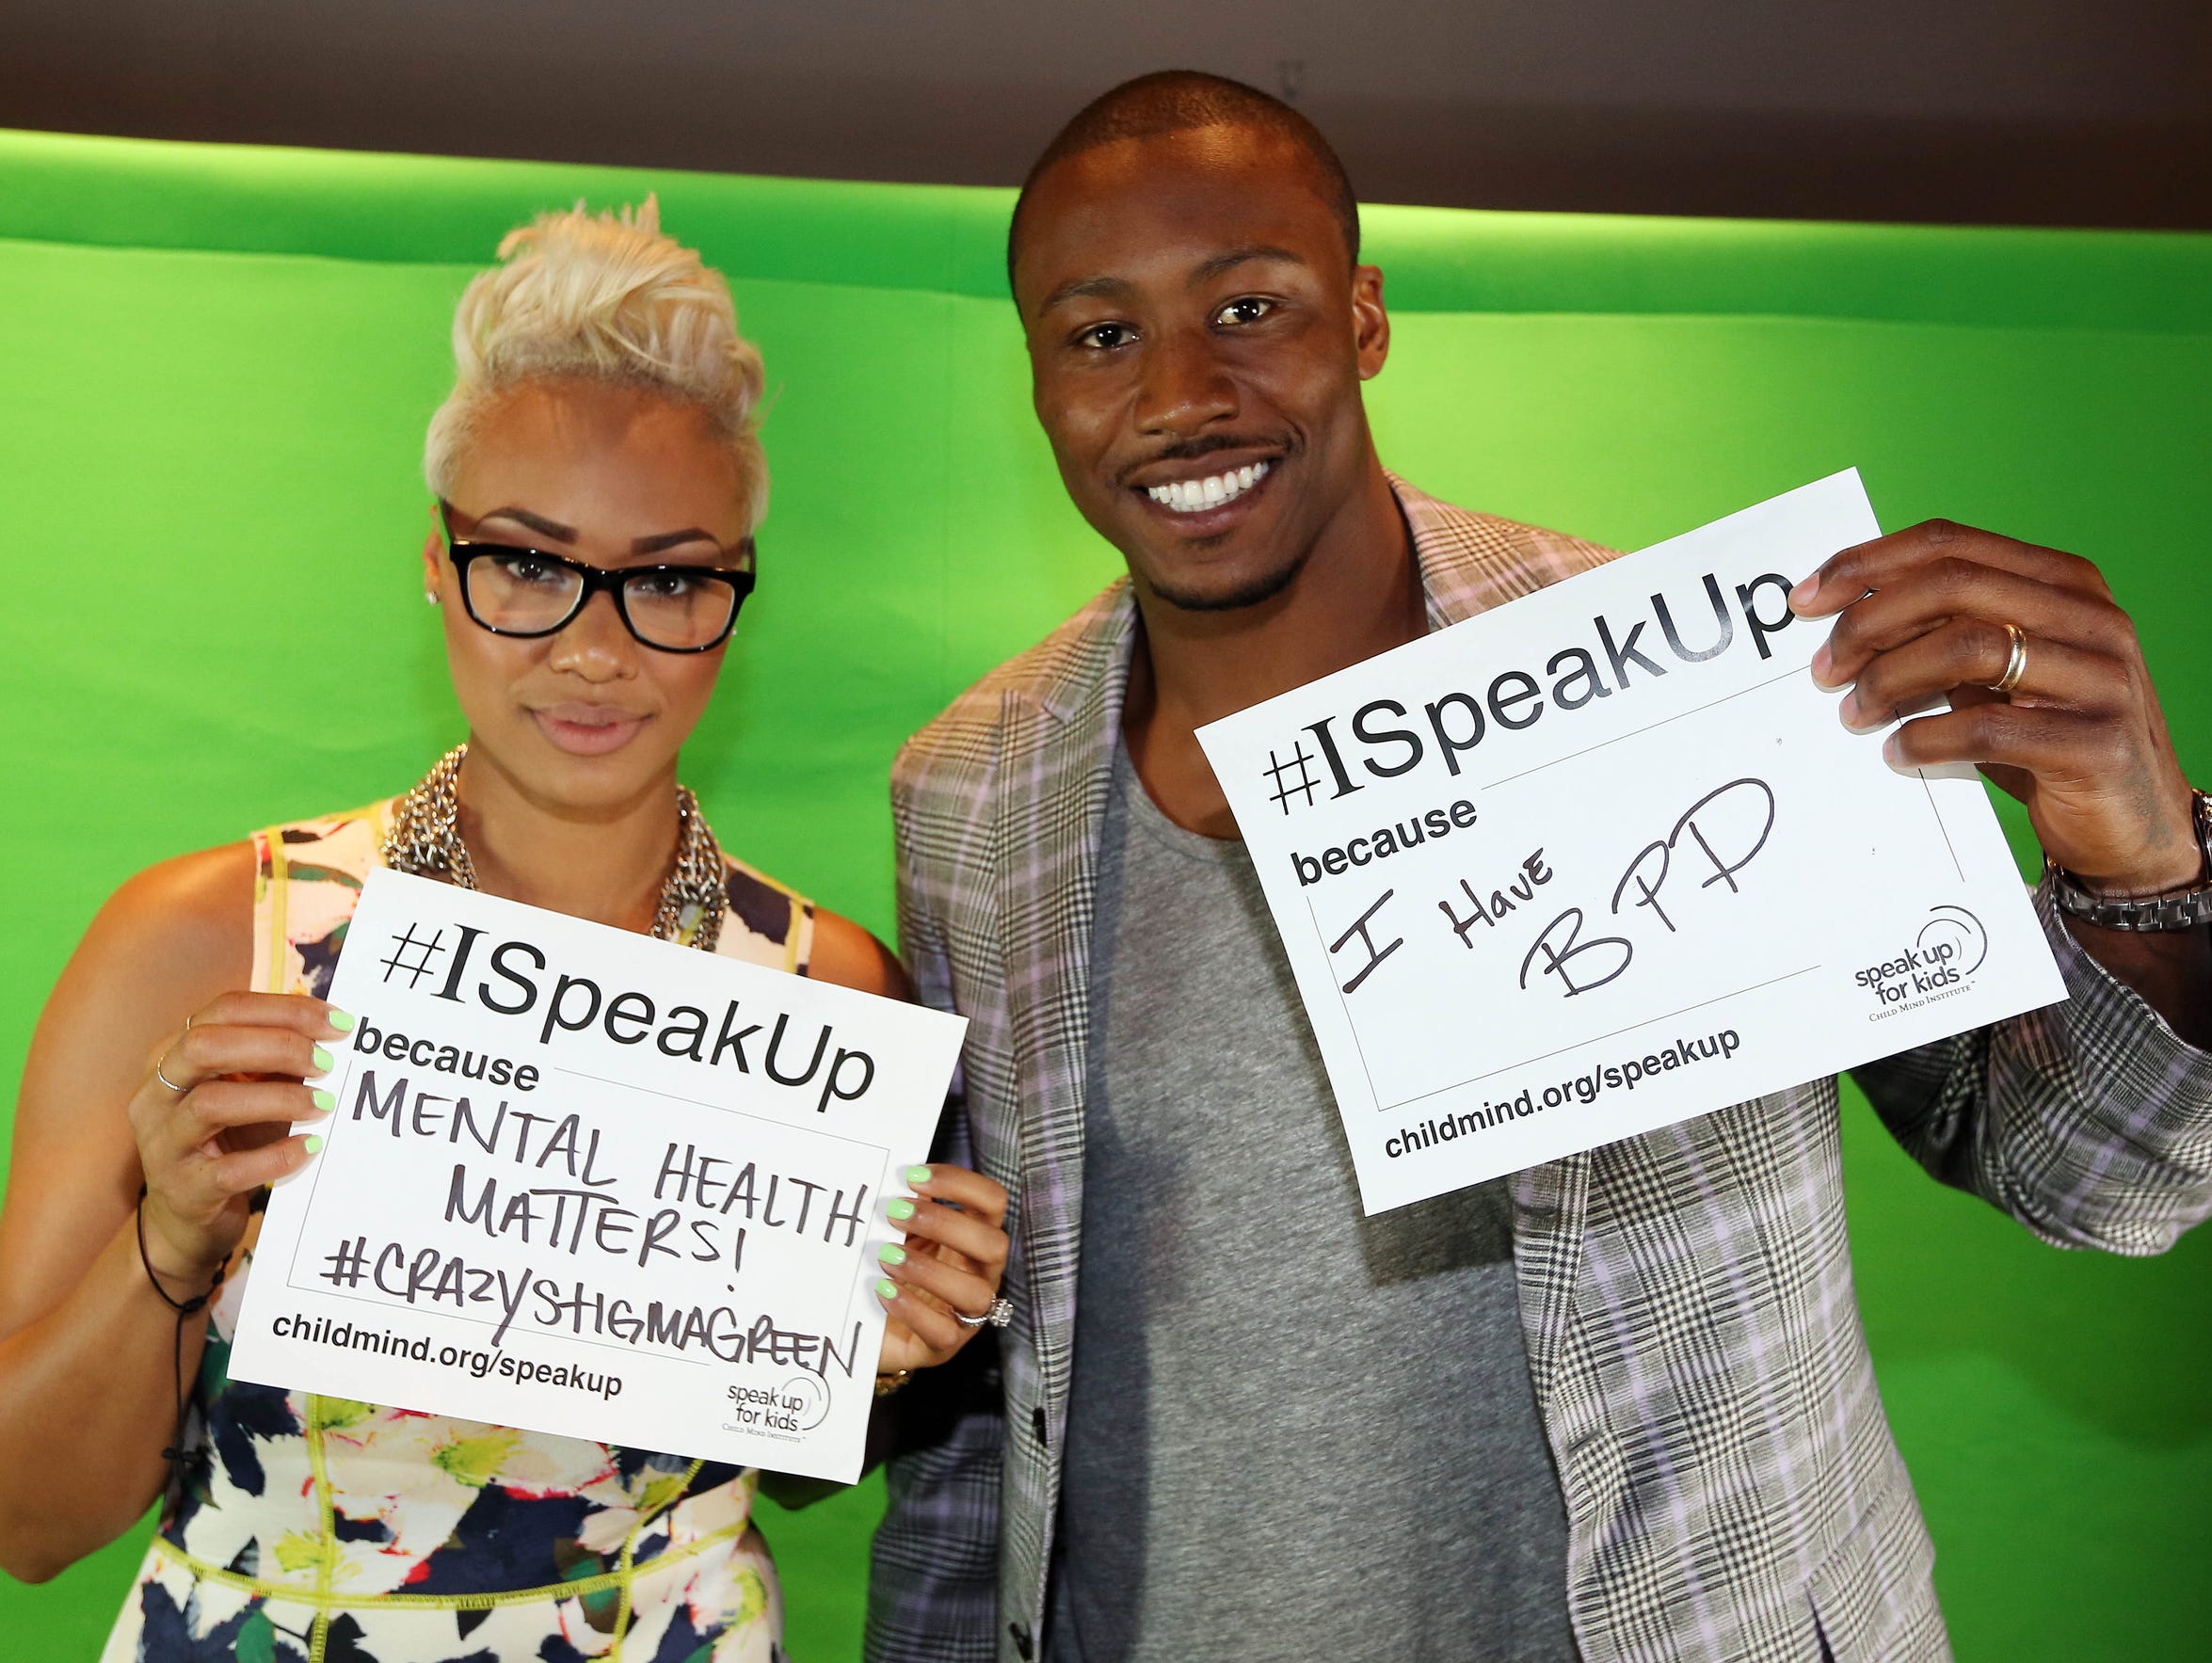 Brandon Marshall, shown here at a mental health event